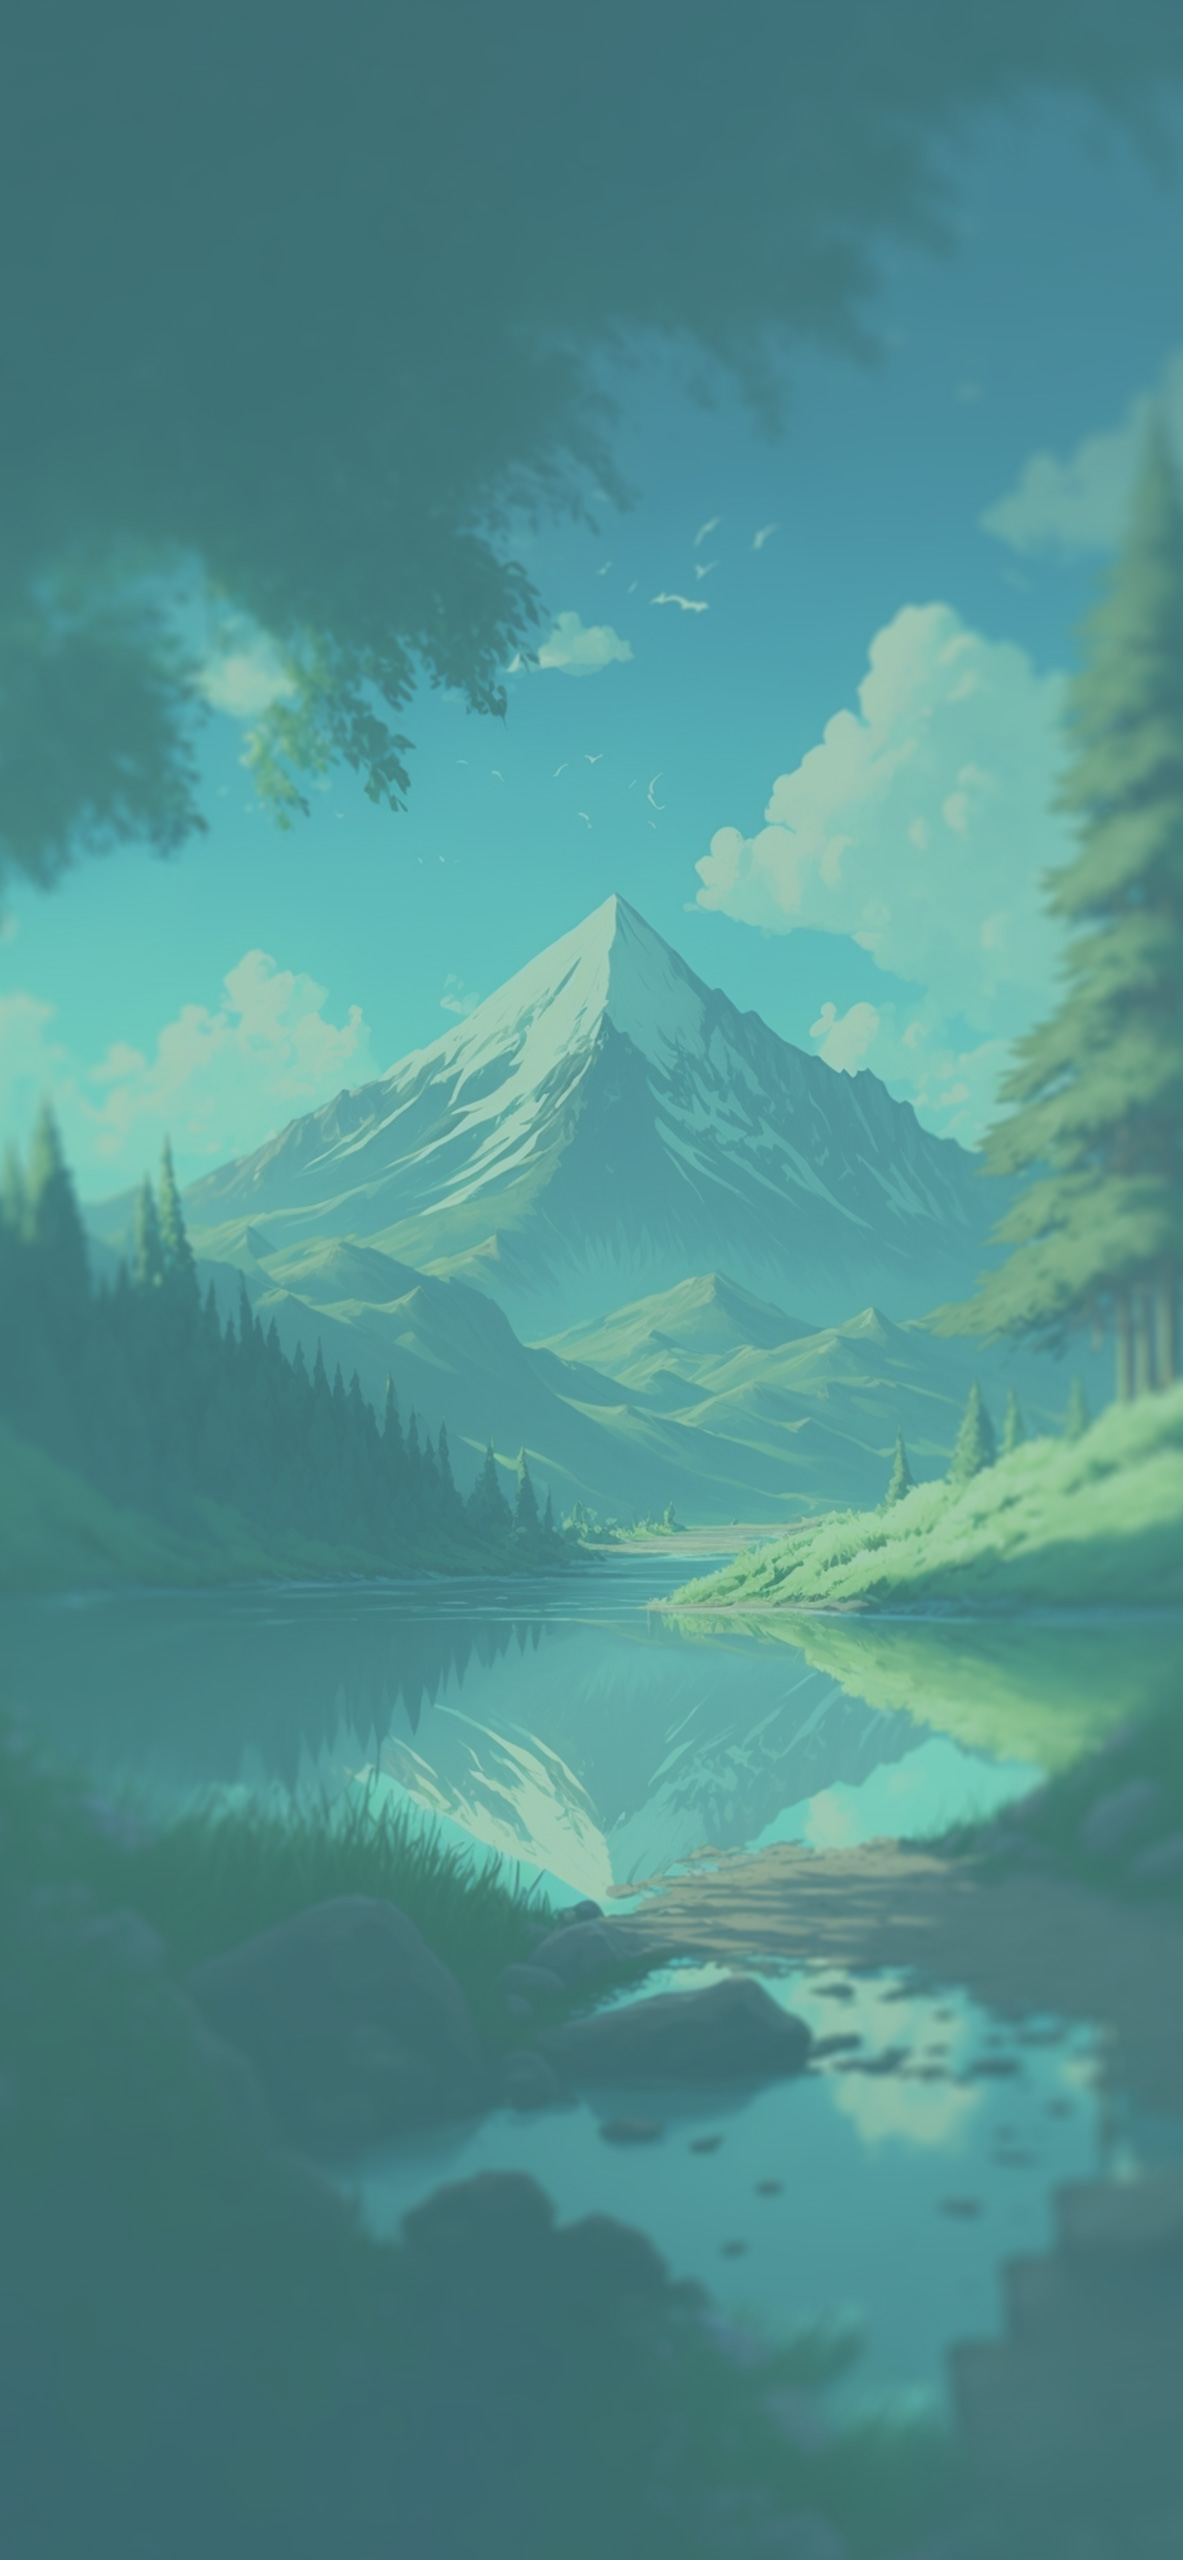 forest lake mountain anime background wallpaper 2